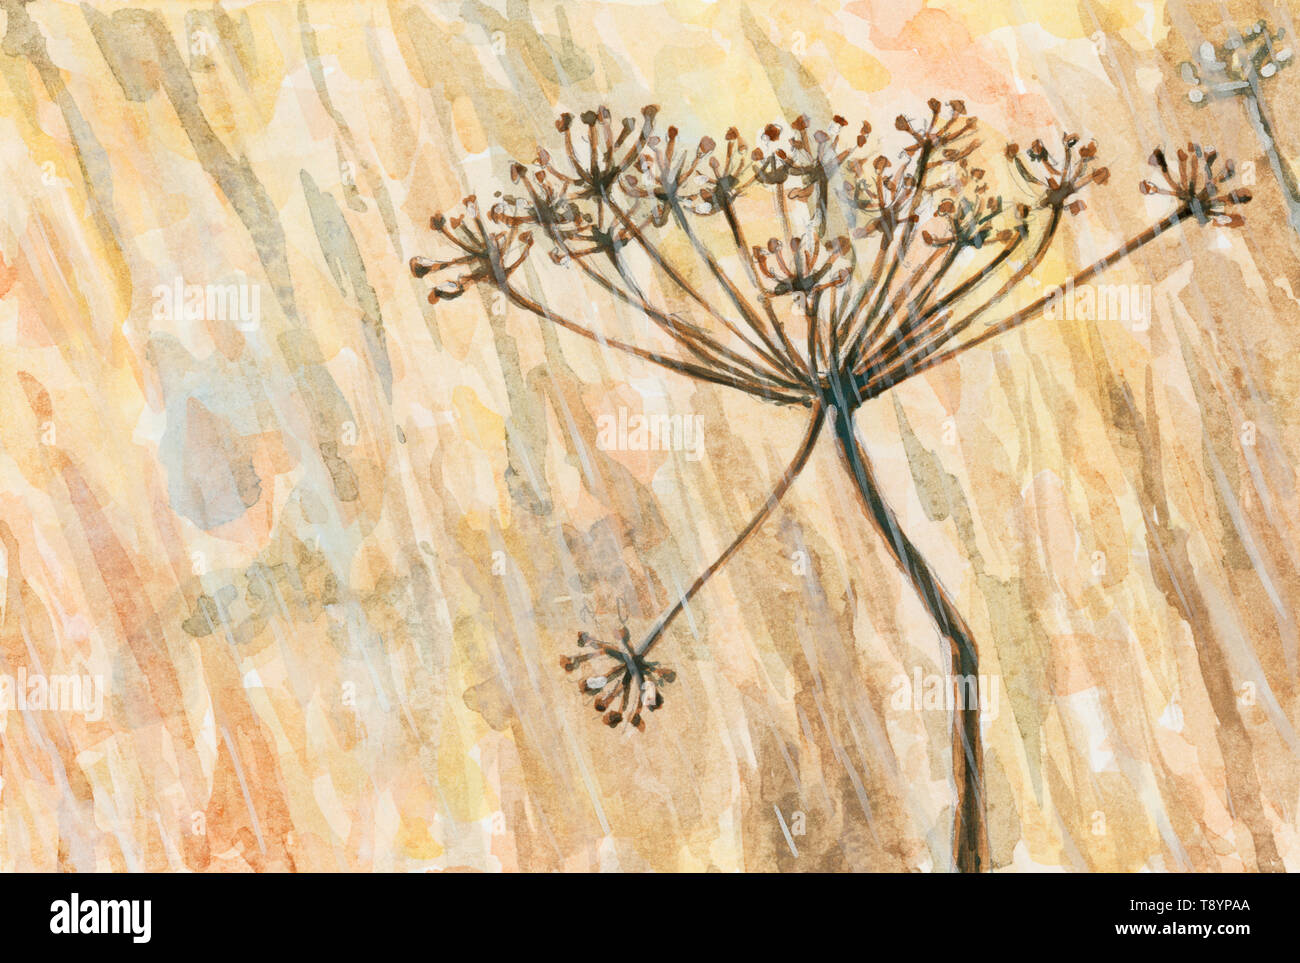 Umbel of a unspecified plant from Apiaceae (Umbelliferae) family in a rainy weather. Watercolor and gouache on paper. Stock Photo